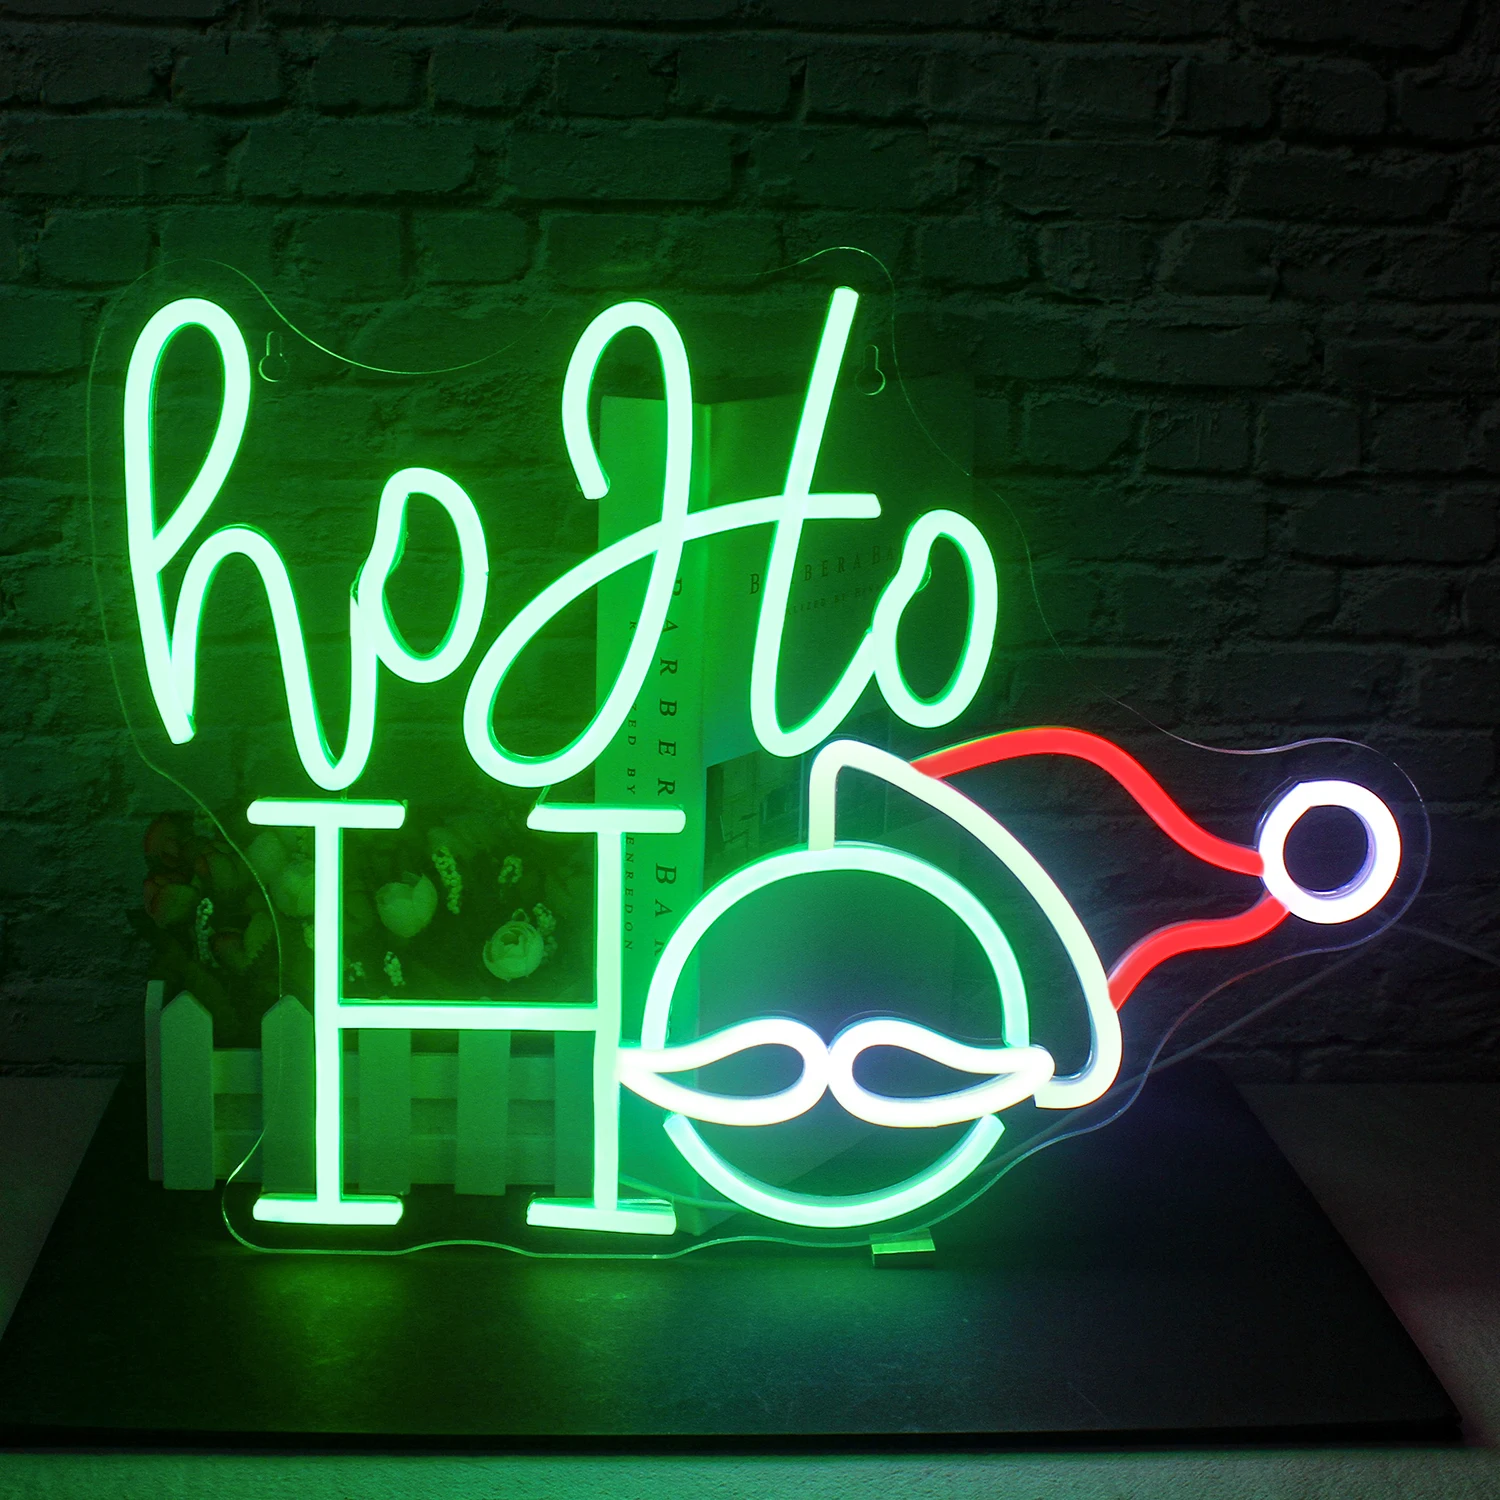 HO HO HO Christmas Neon Sign LED Sign Light with Acrylic Board Indoor Party Kids Bedroom Store Bar Pub Club Christmas Decor Neon christmas neon usb neon lights led acrylic board neon signs for wall decor christmas party supplies bedroom bar pub club